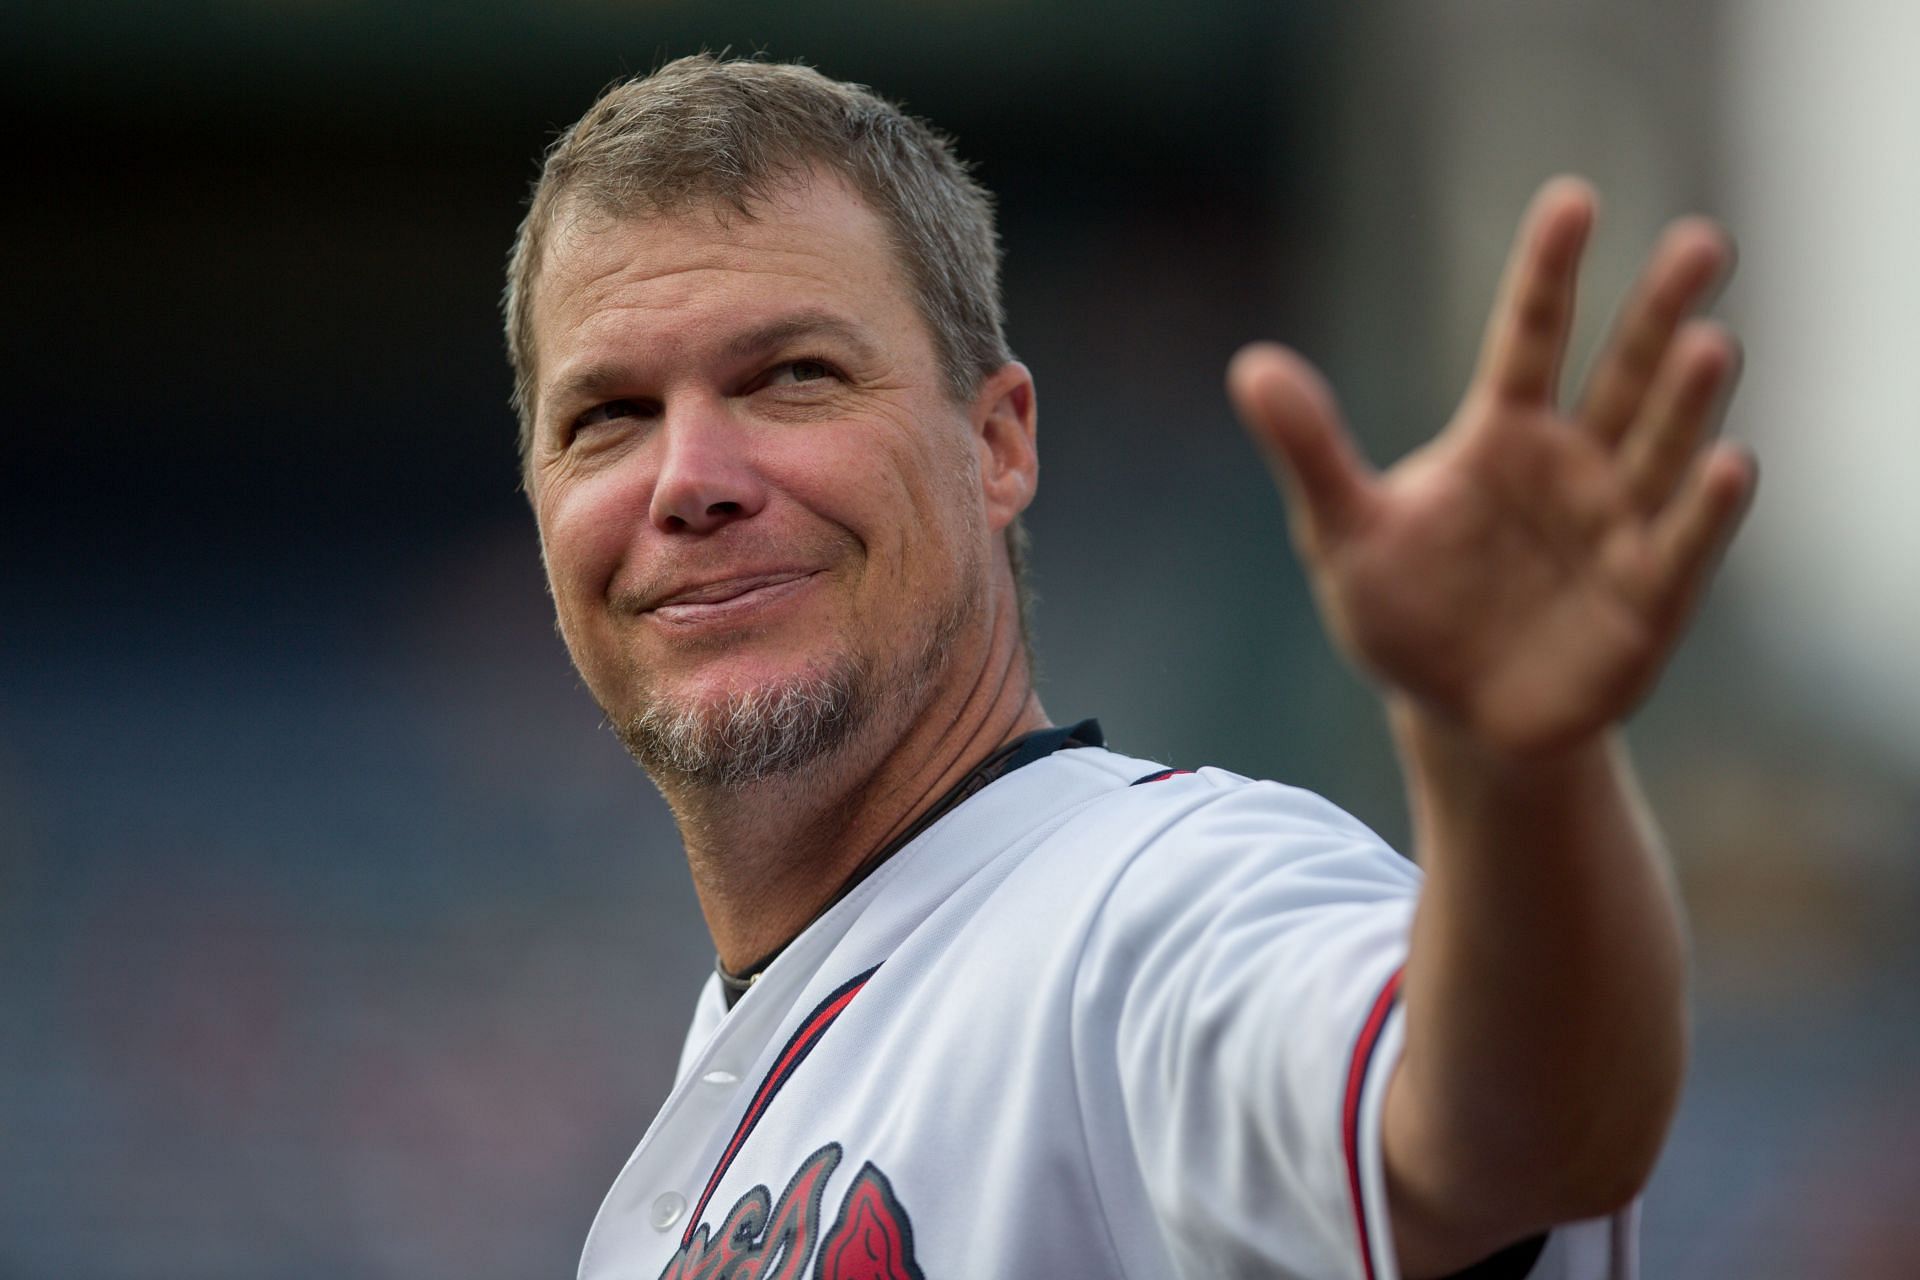 Former Atlanta Braves player Chipper Jones waves to the crowd during a pre-game ceremony honoring many Braves alumni players at Turner Field on August 8, 2014. (Photo by Kevin Liles/Getty Images)